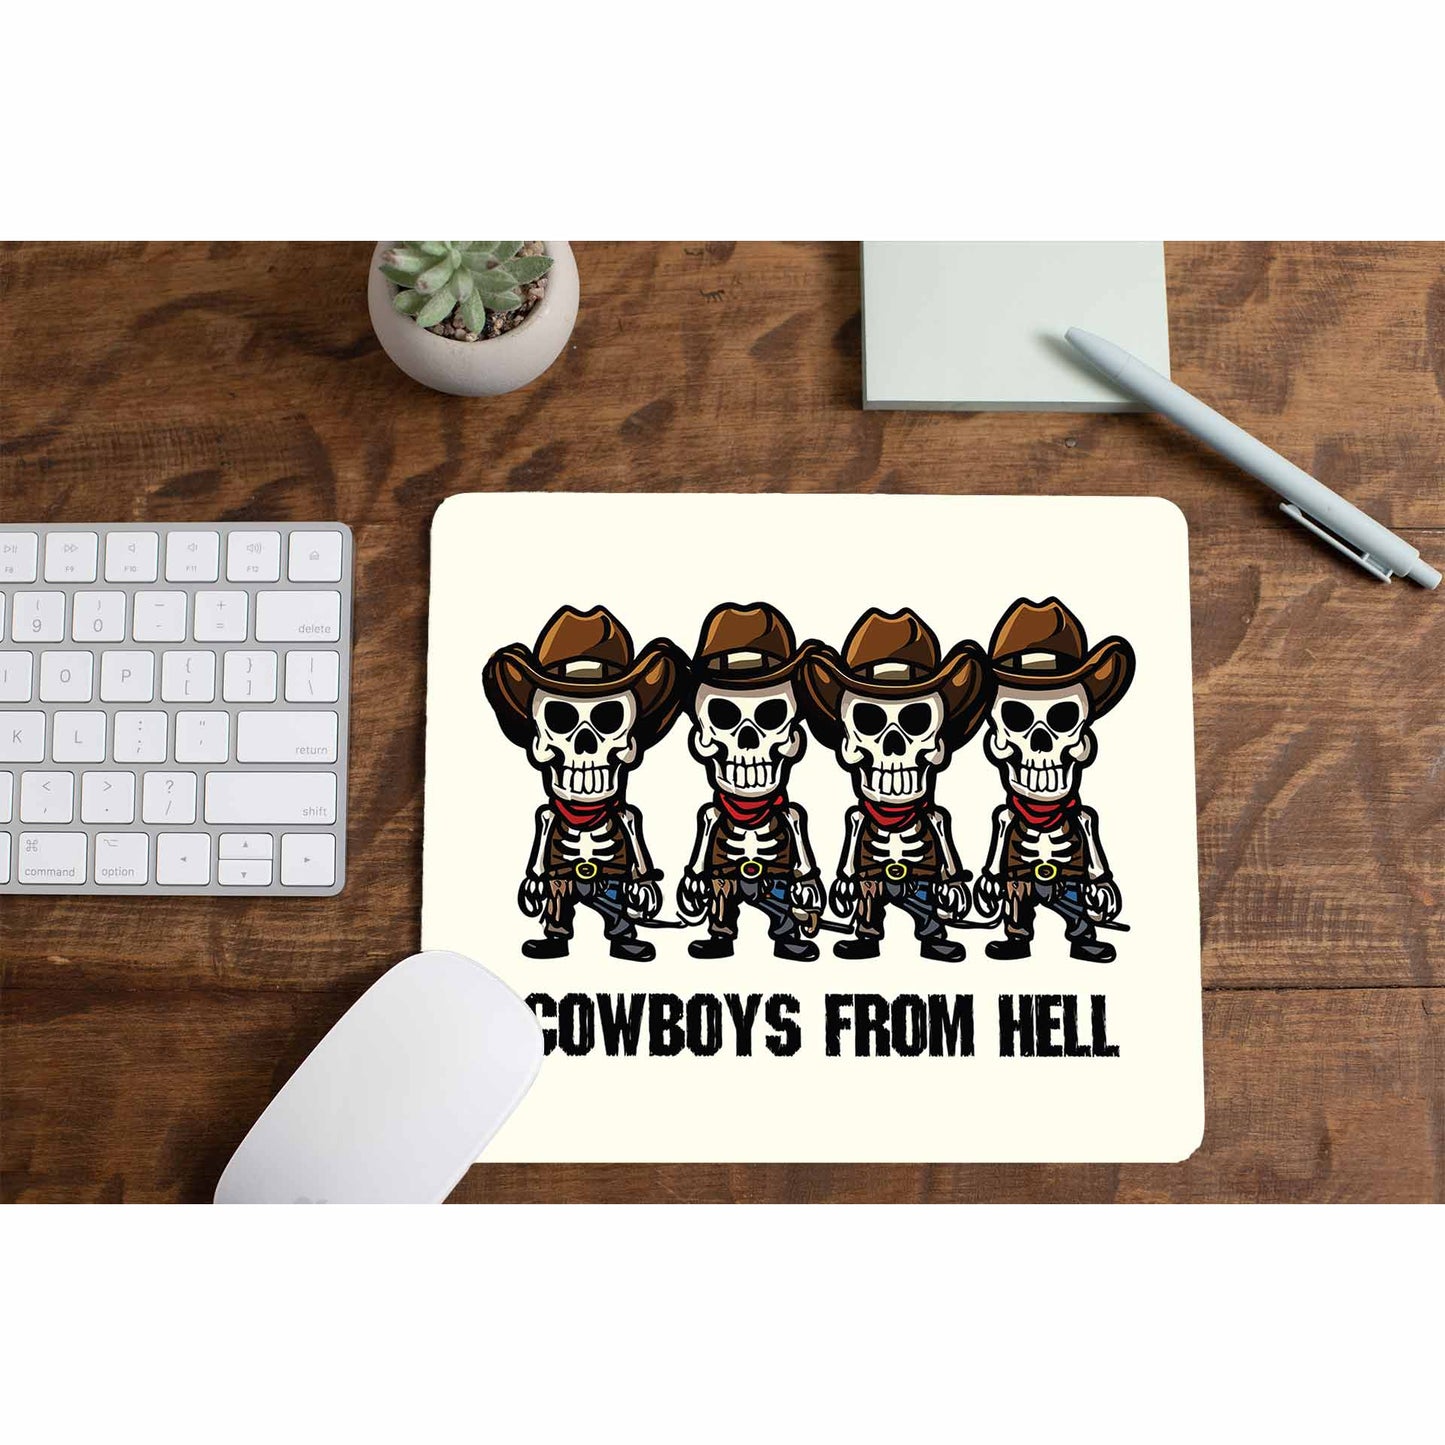 pantera cowboys from hell toon mousepad logitech large anime music band buy online united states of america usa the banyan tee tbt men women girls boys unisex